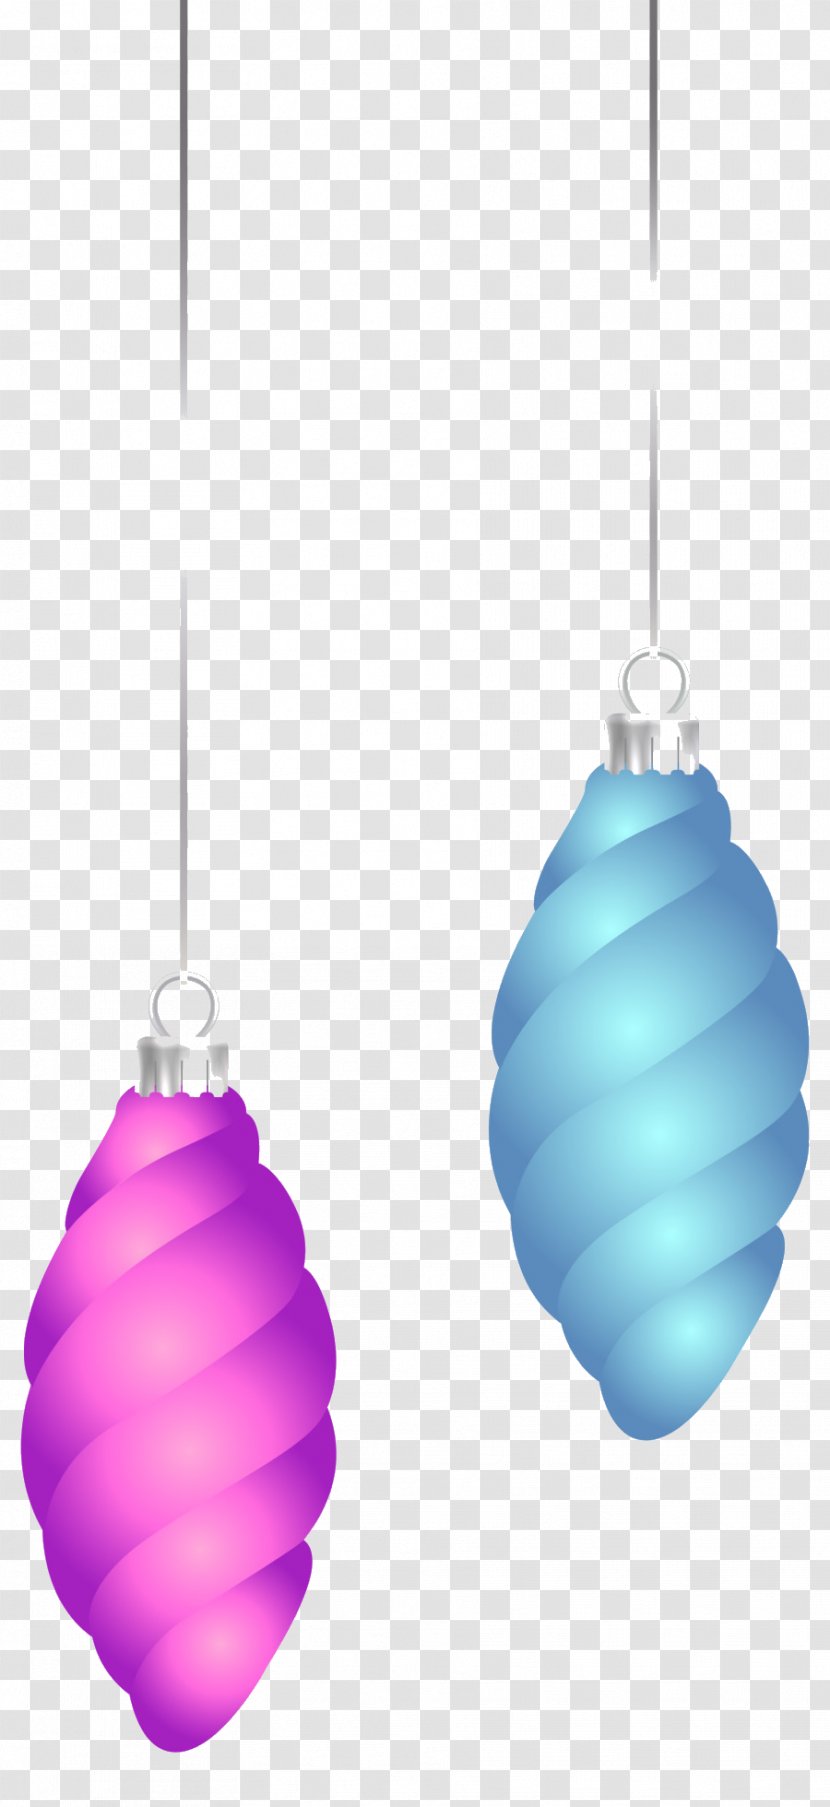 Christmas Tree Background - Turquoise - Ceiling Fixture Holiday Ornament Transparent PNG